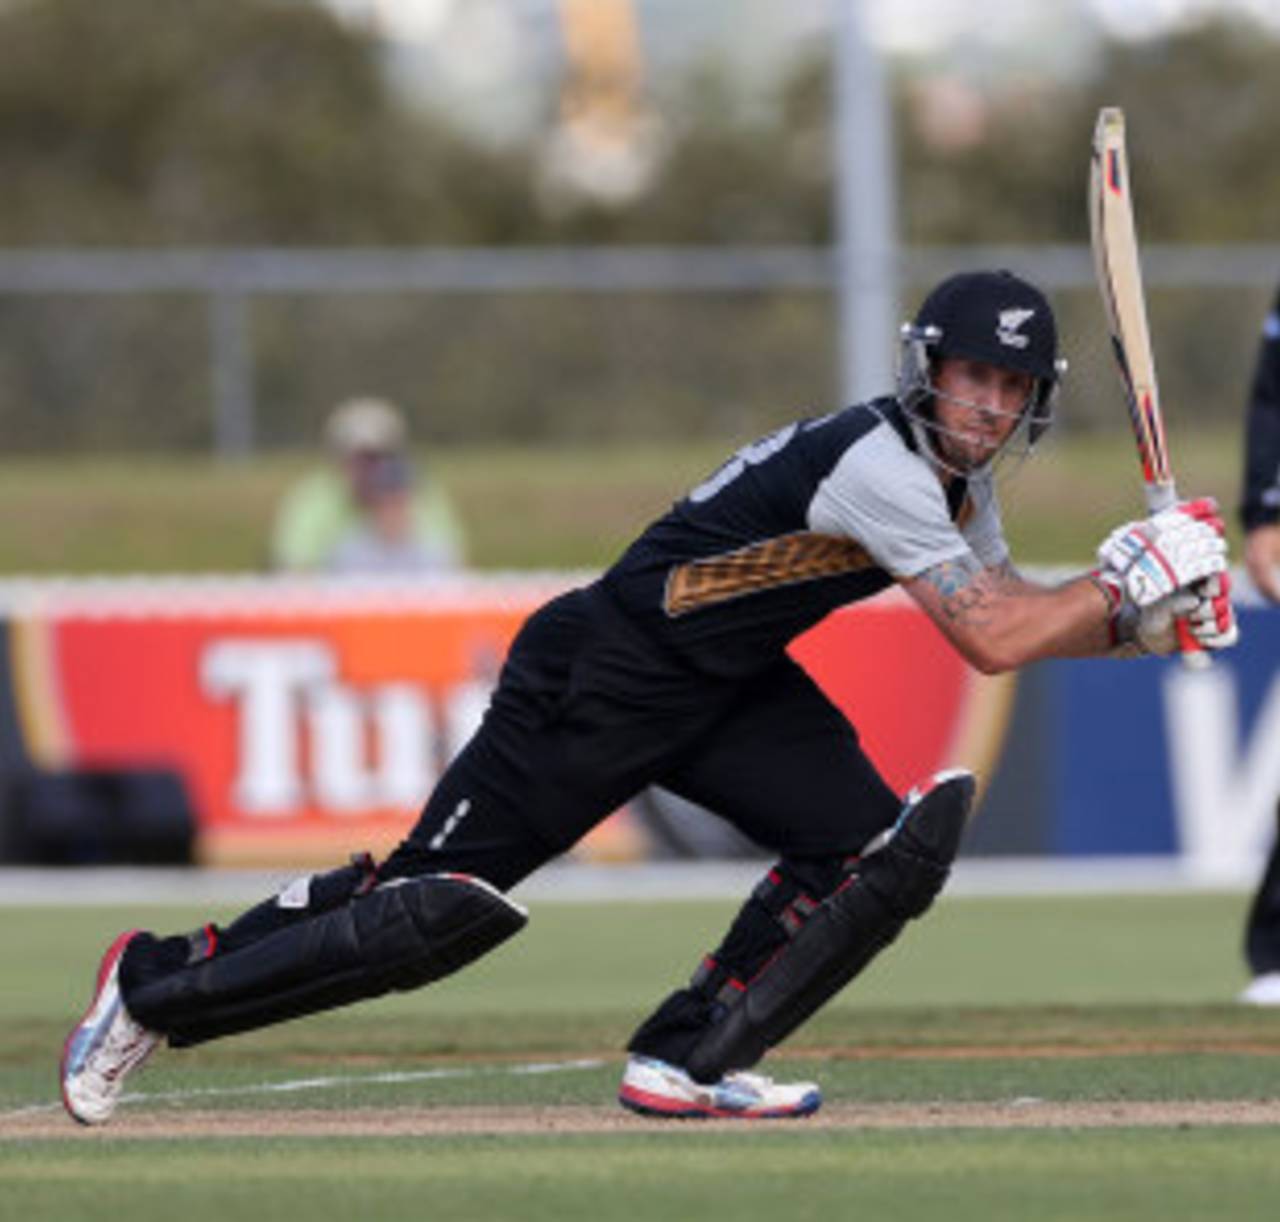 Luke Ronchi was born in New Zealand, grew up in Australia, and now plays for Wellington&nbsp;&nbsp;&bull;&nbsp;&nbsp;AFP